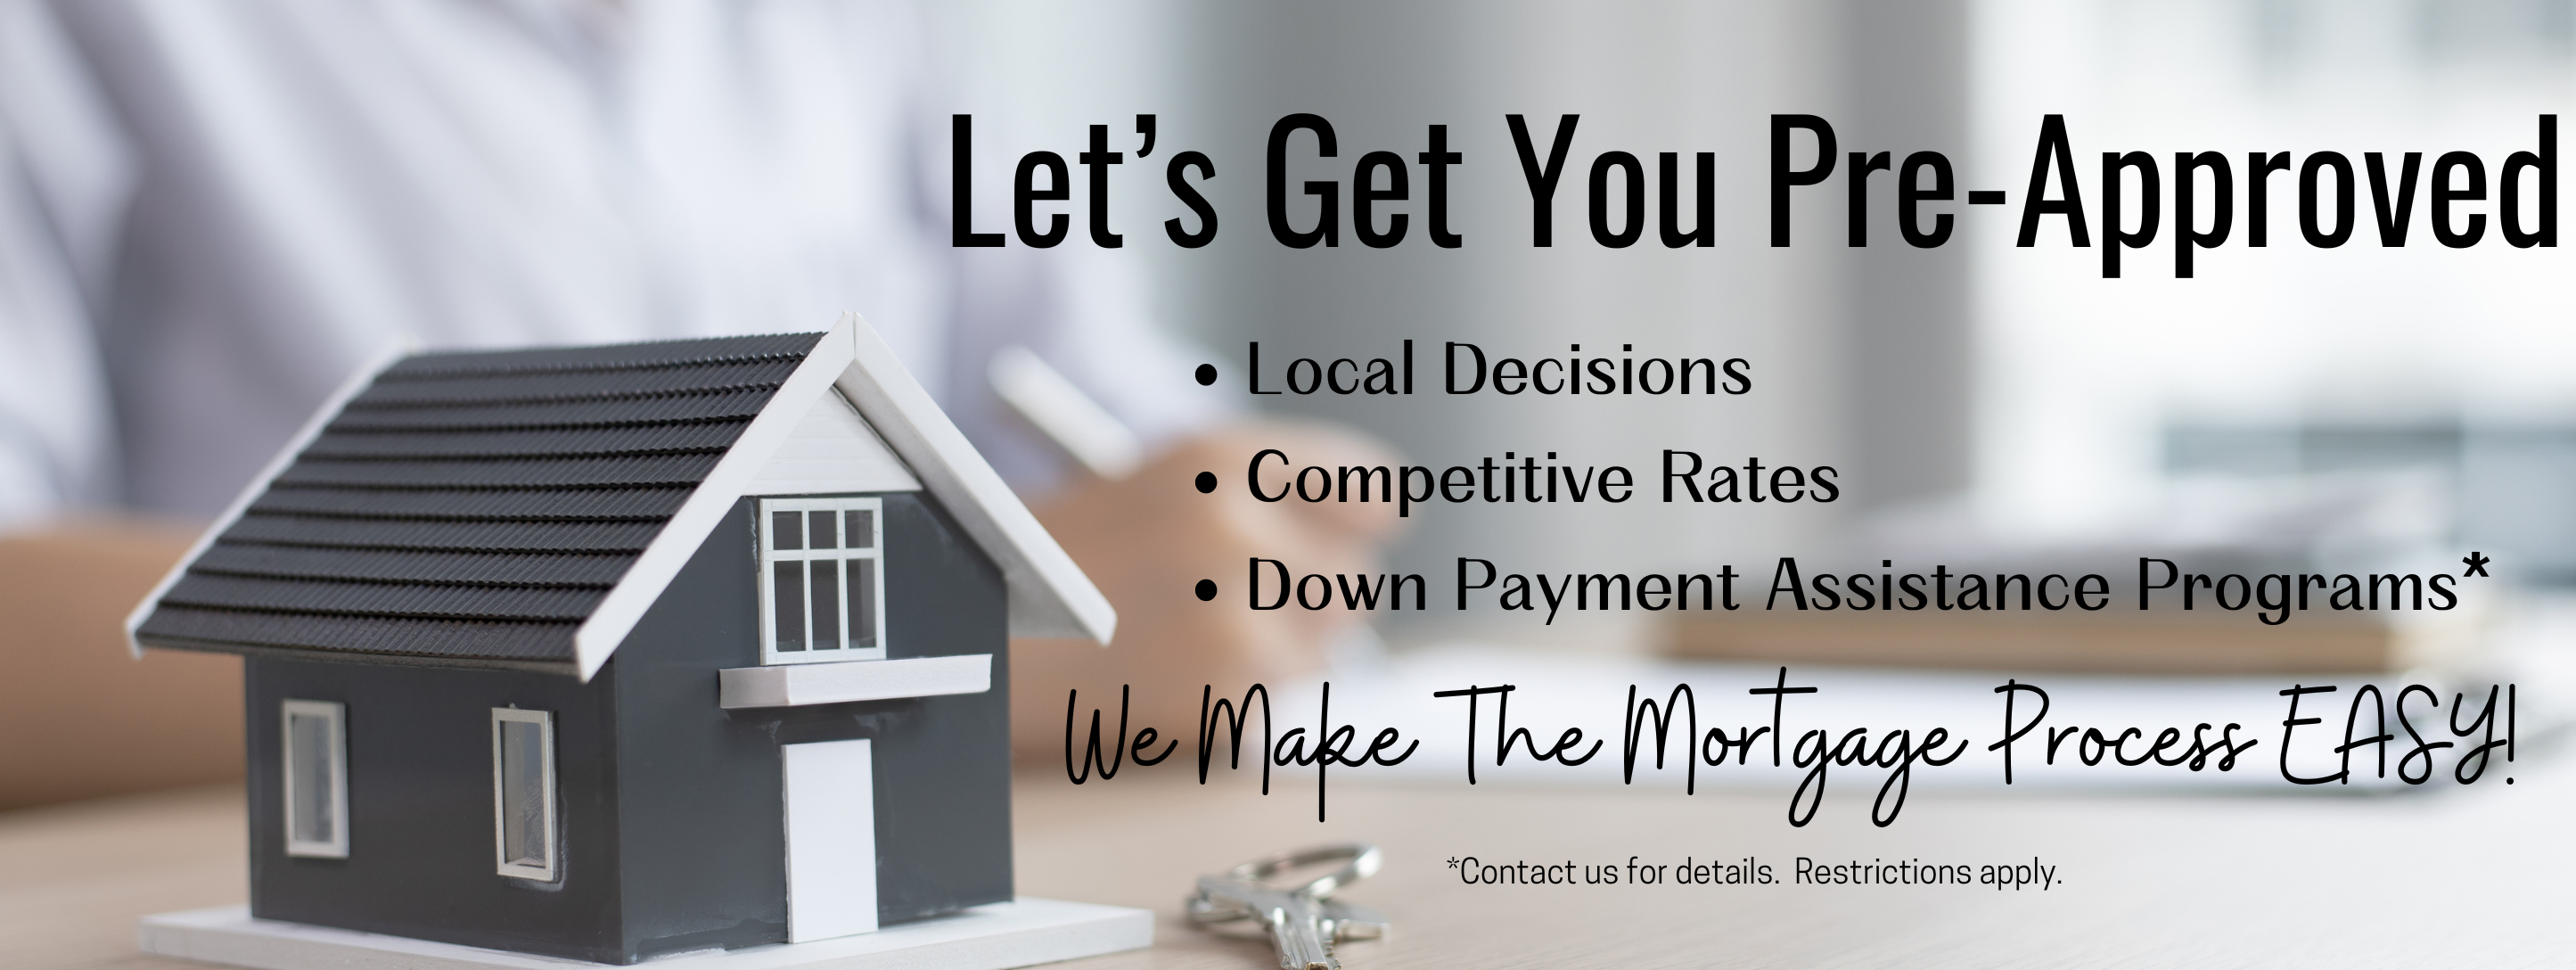 Let's get you pre-approved. Local decisions, competitive rates, down payment assistance programs. We make the mortgage process easy!